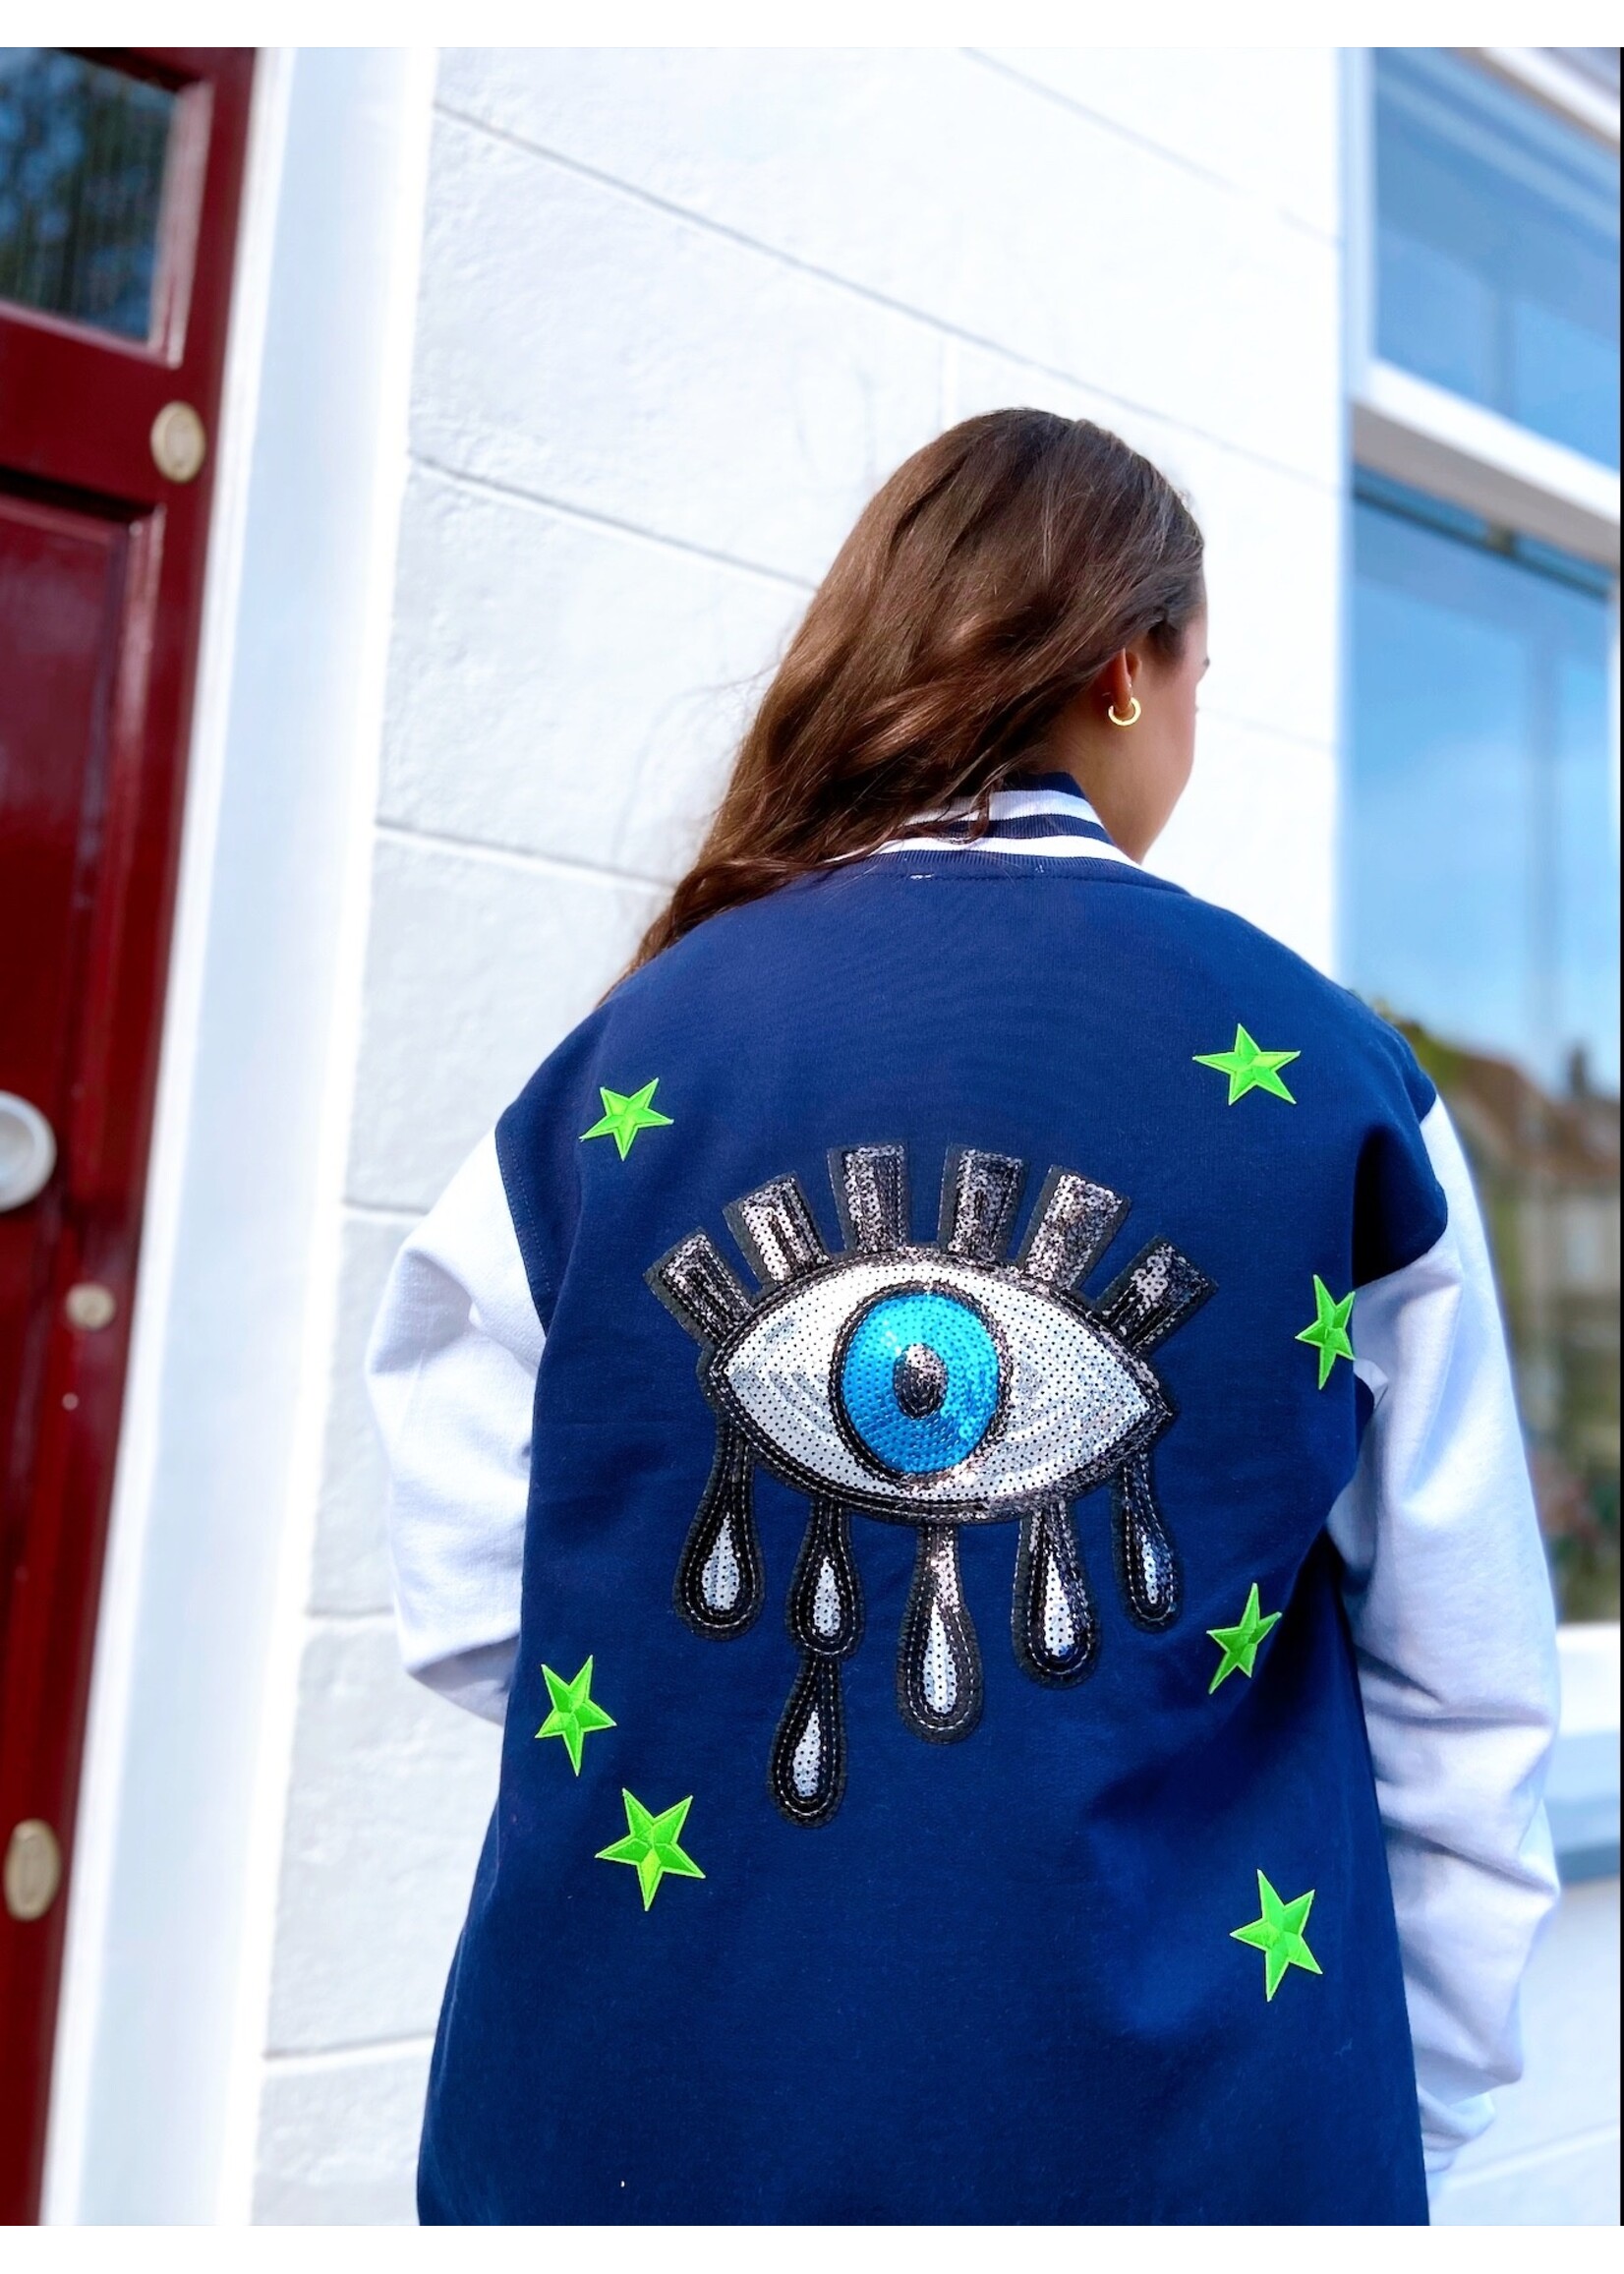 YOU ARE SPECIAL "Written In The Stars" Blue Baseball Jacket (1 exemplaar)